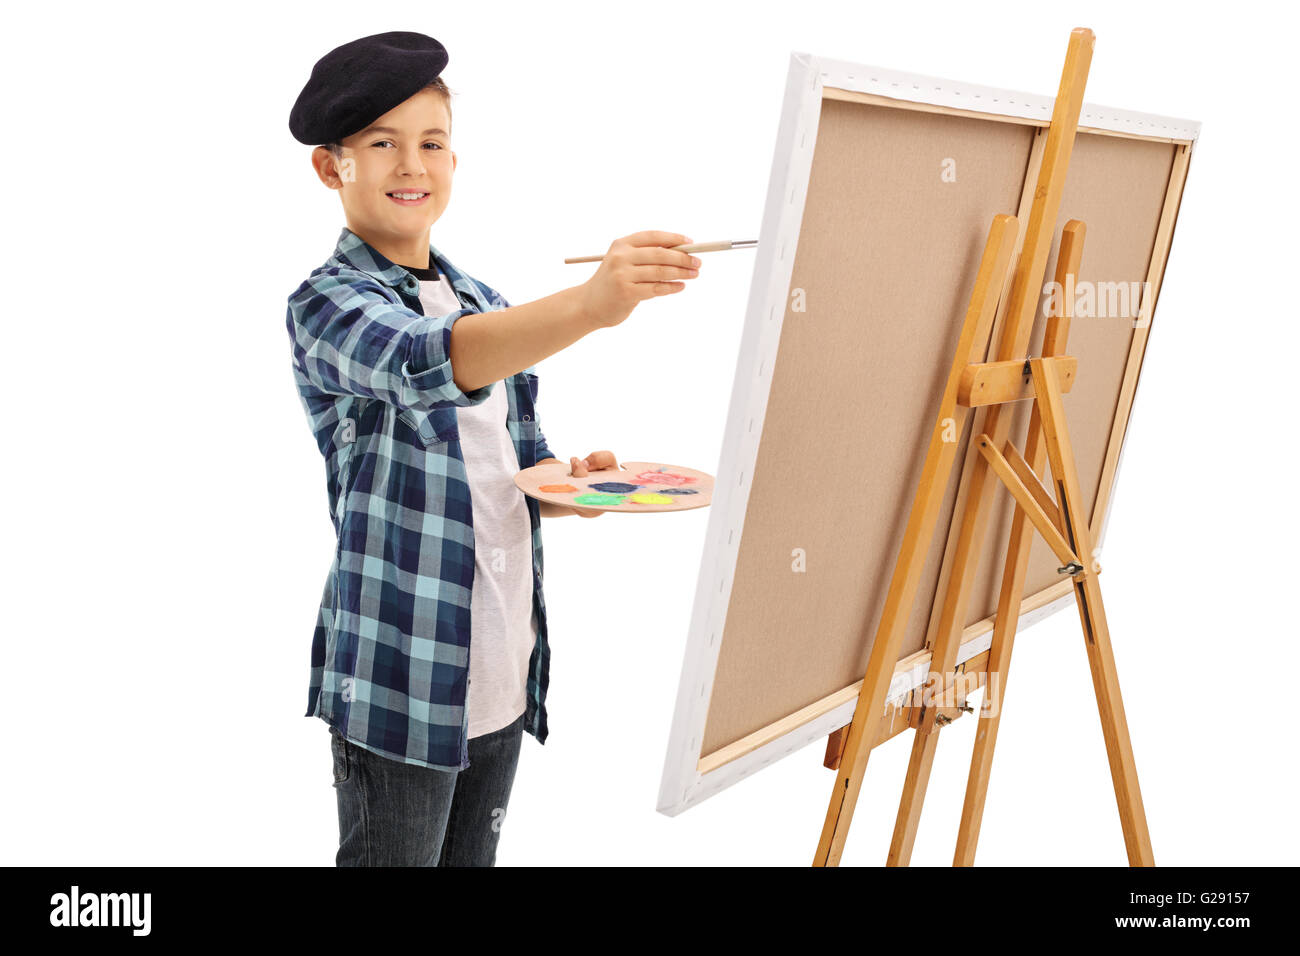 Cute little boy with a black beret painting on a canvas and looking at the camera isolated on white background Stock Photo